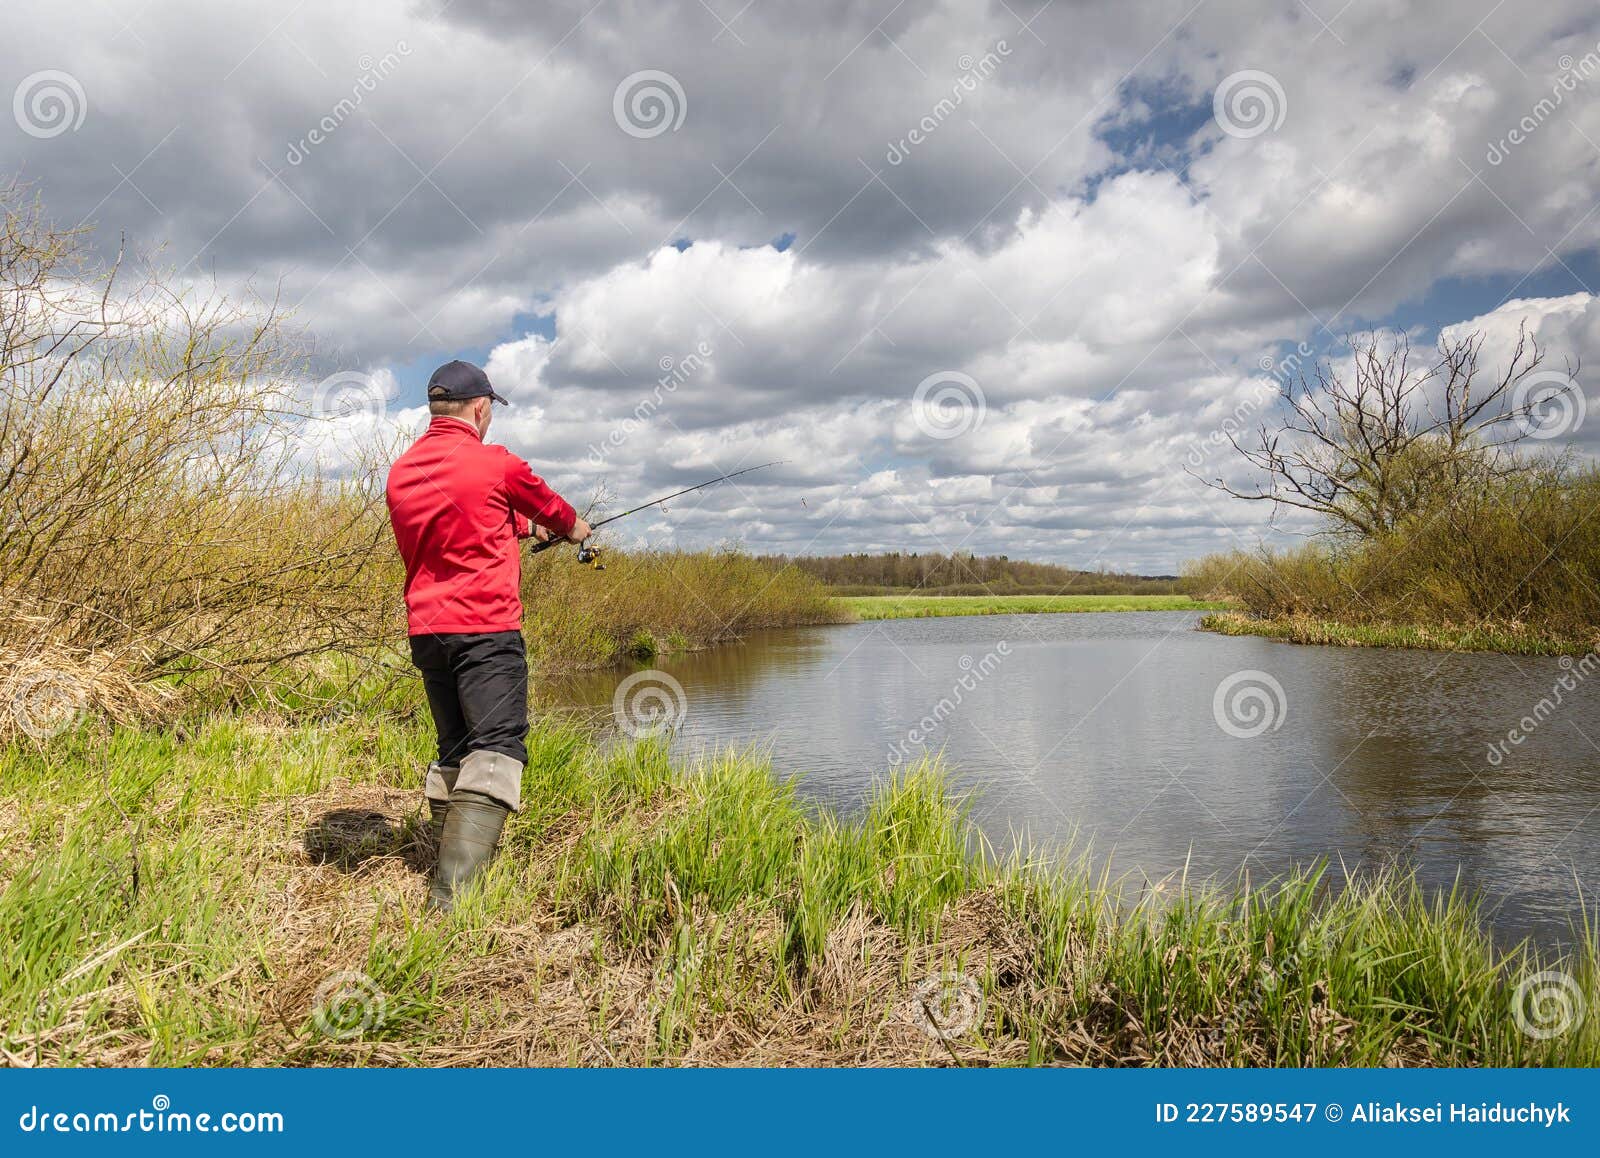 Fisher with a Fishing Rod Stands on the River Bank Stock Image